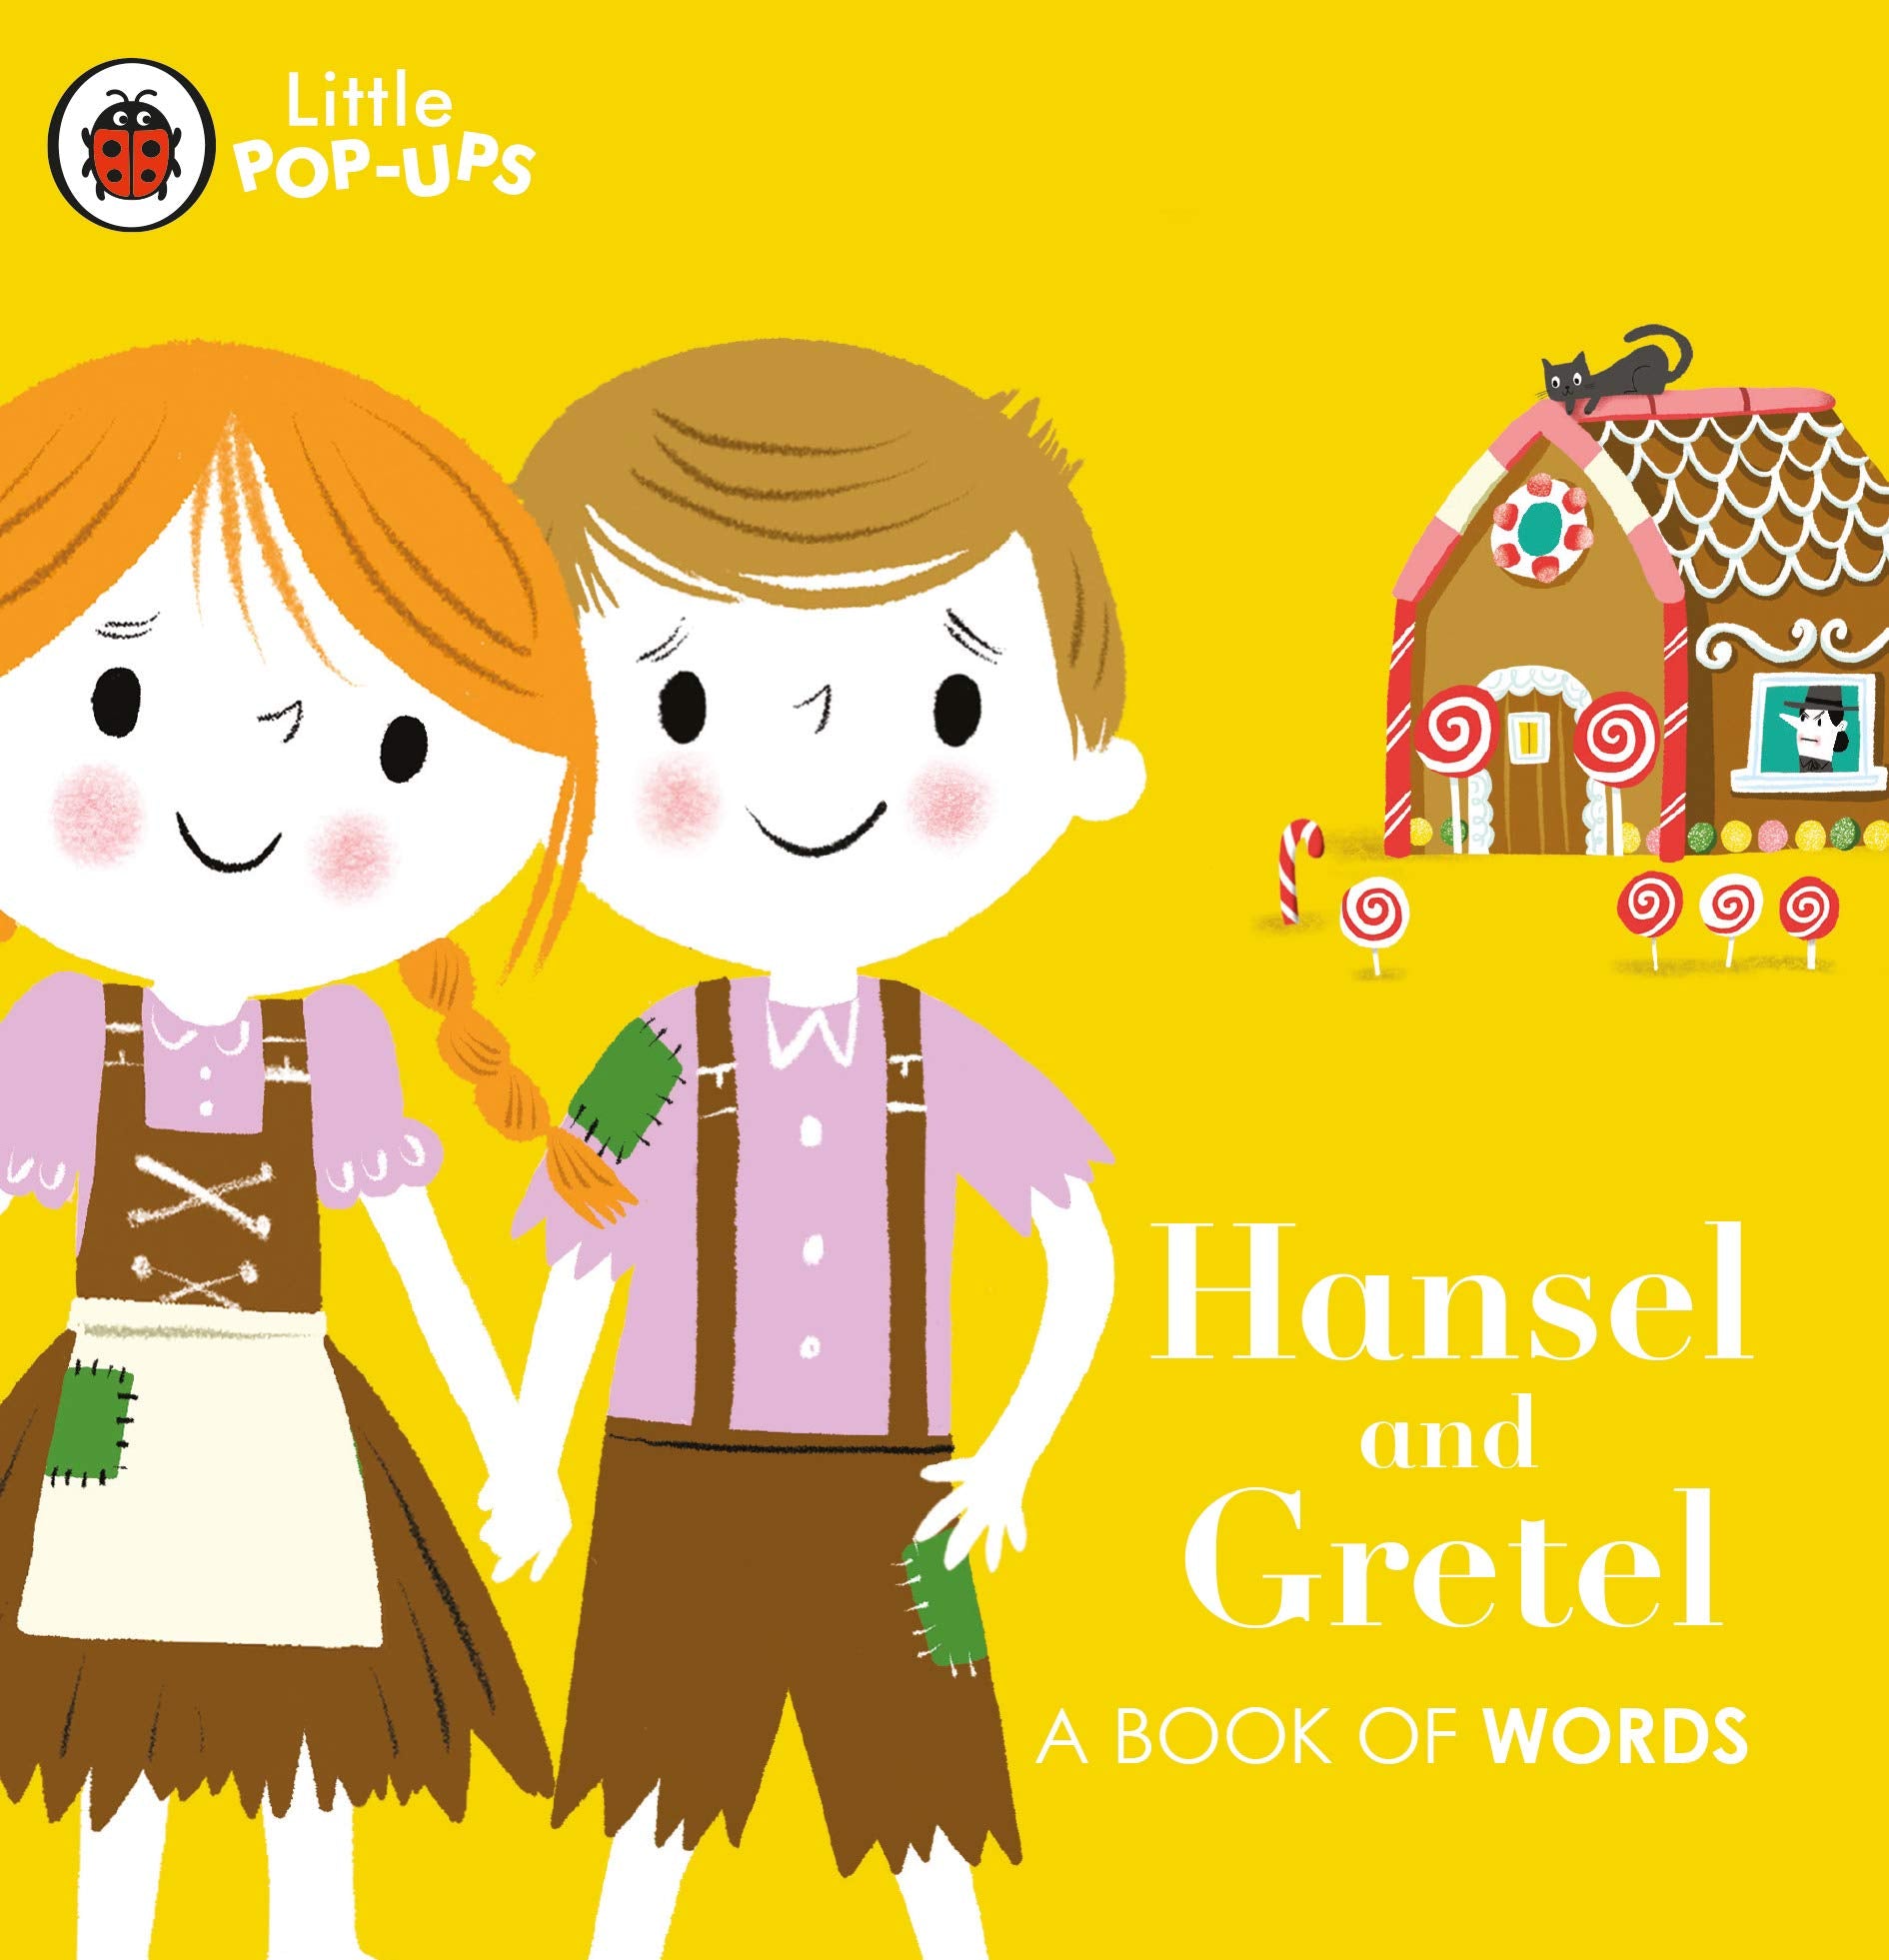 Little Pop - Ups : Hansel and Gretel : A Book of Words - Board book